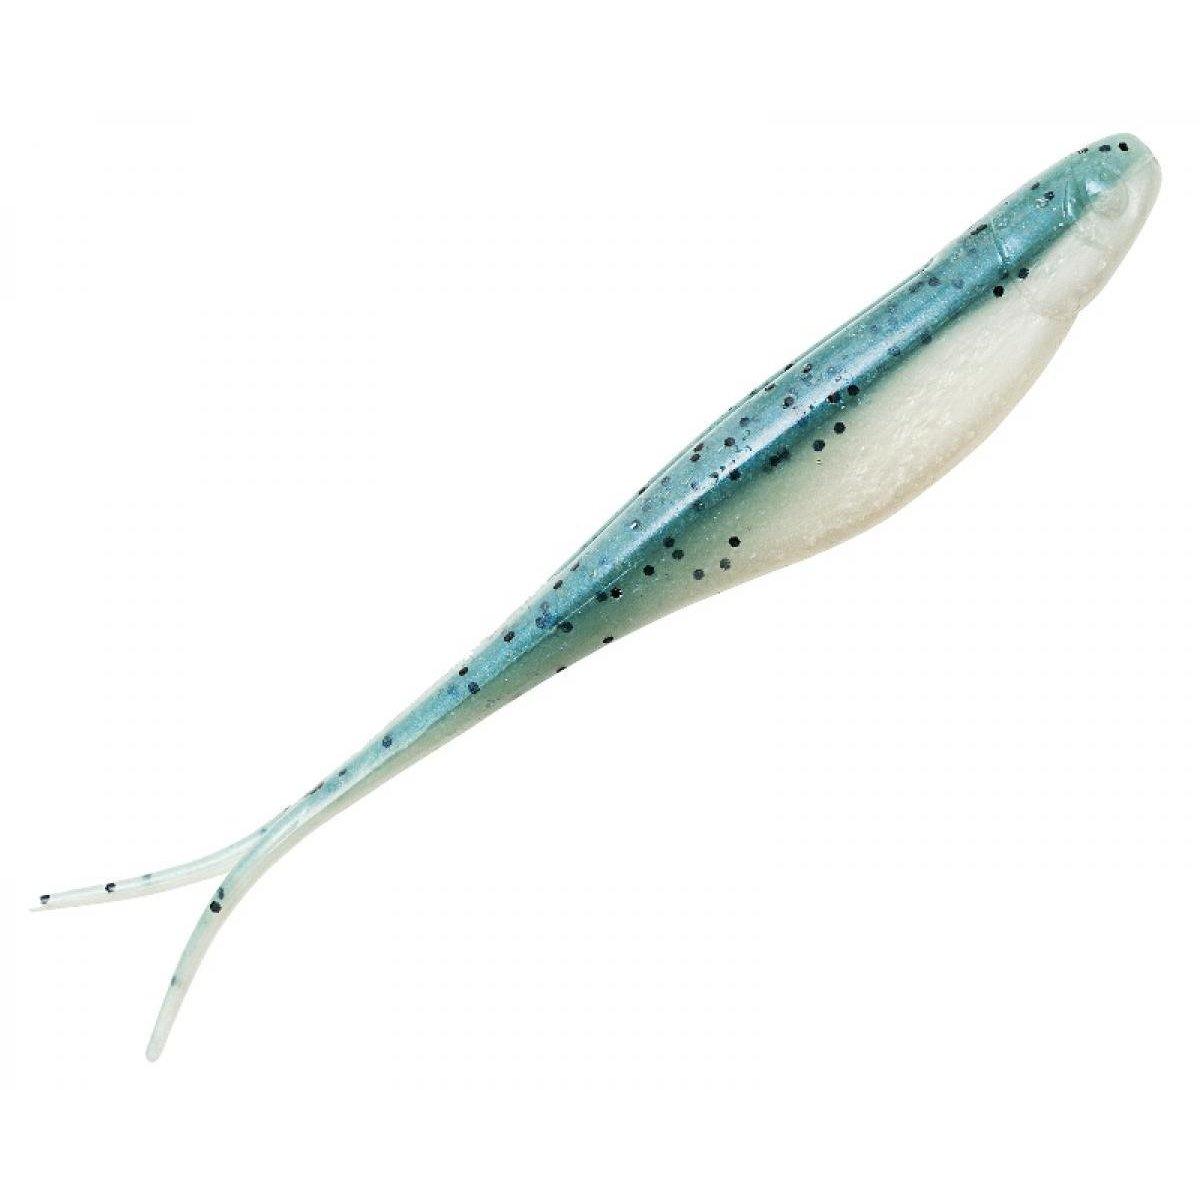 Fishing Lures for Sale - #1 for fishing lures in Australia Page 9 - Addict  Tackle